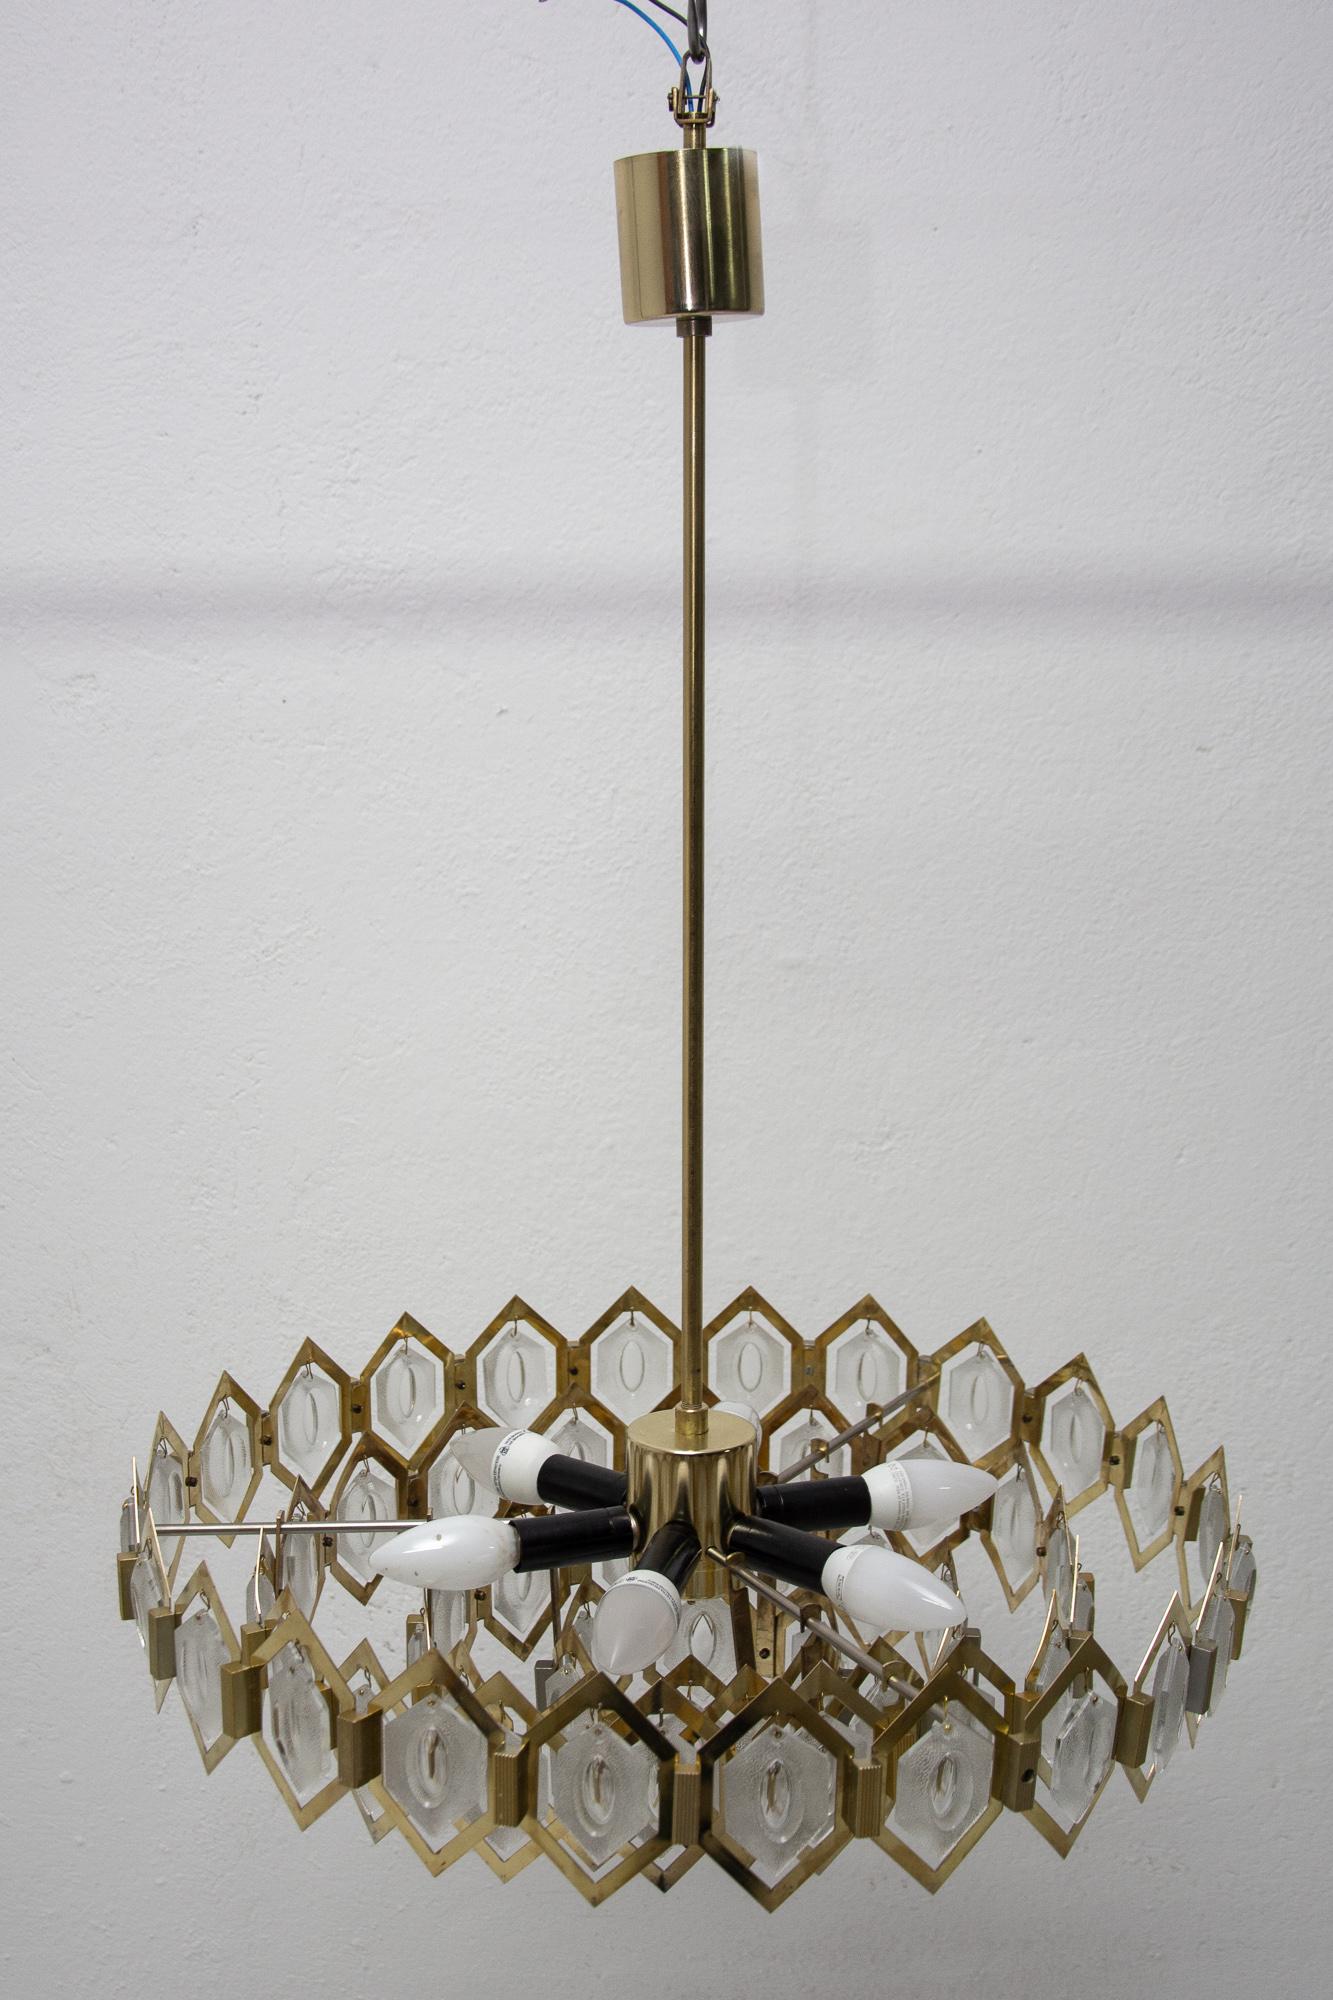 This Cascade pendant was designed by Czech designer Jaroslav Bejvl in the 1970s and it was produced by Kamenický Šenov. It is made of a combination of glass and metal. It was completely professionally cleaned and rewired.

